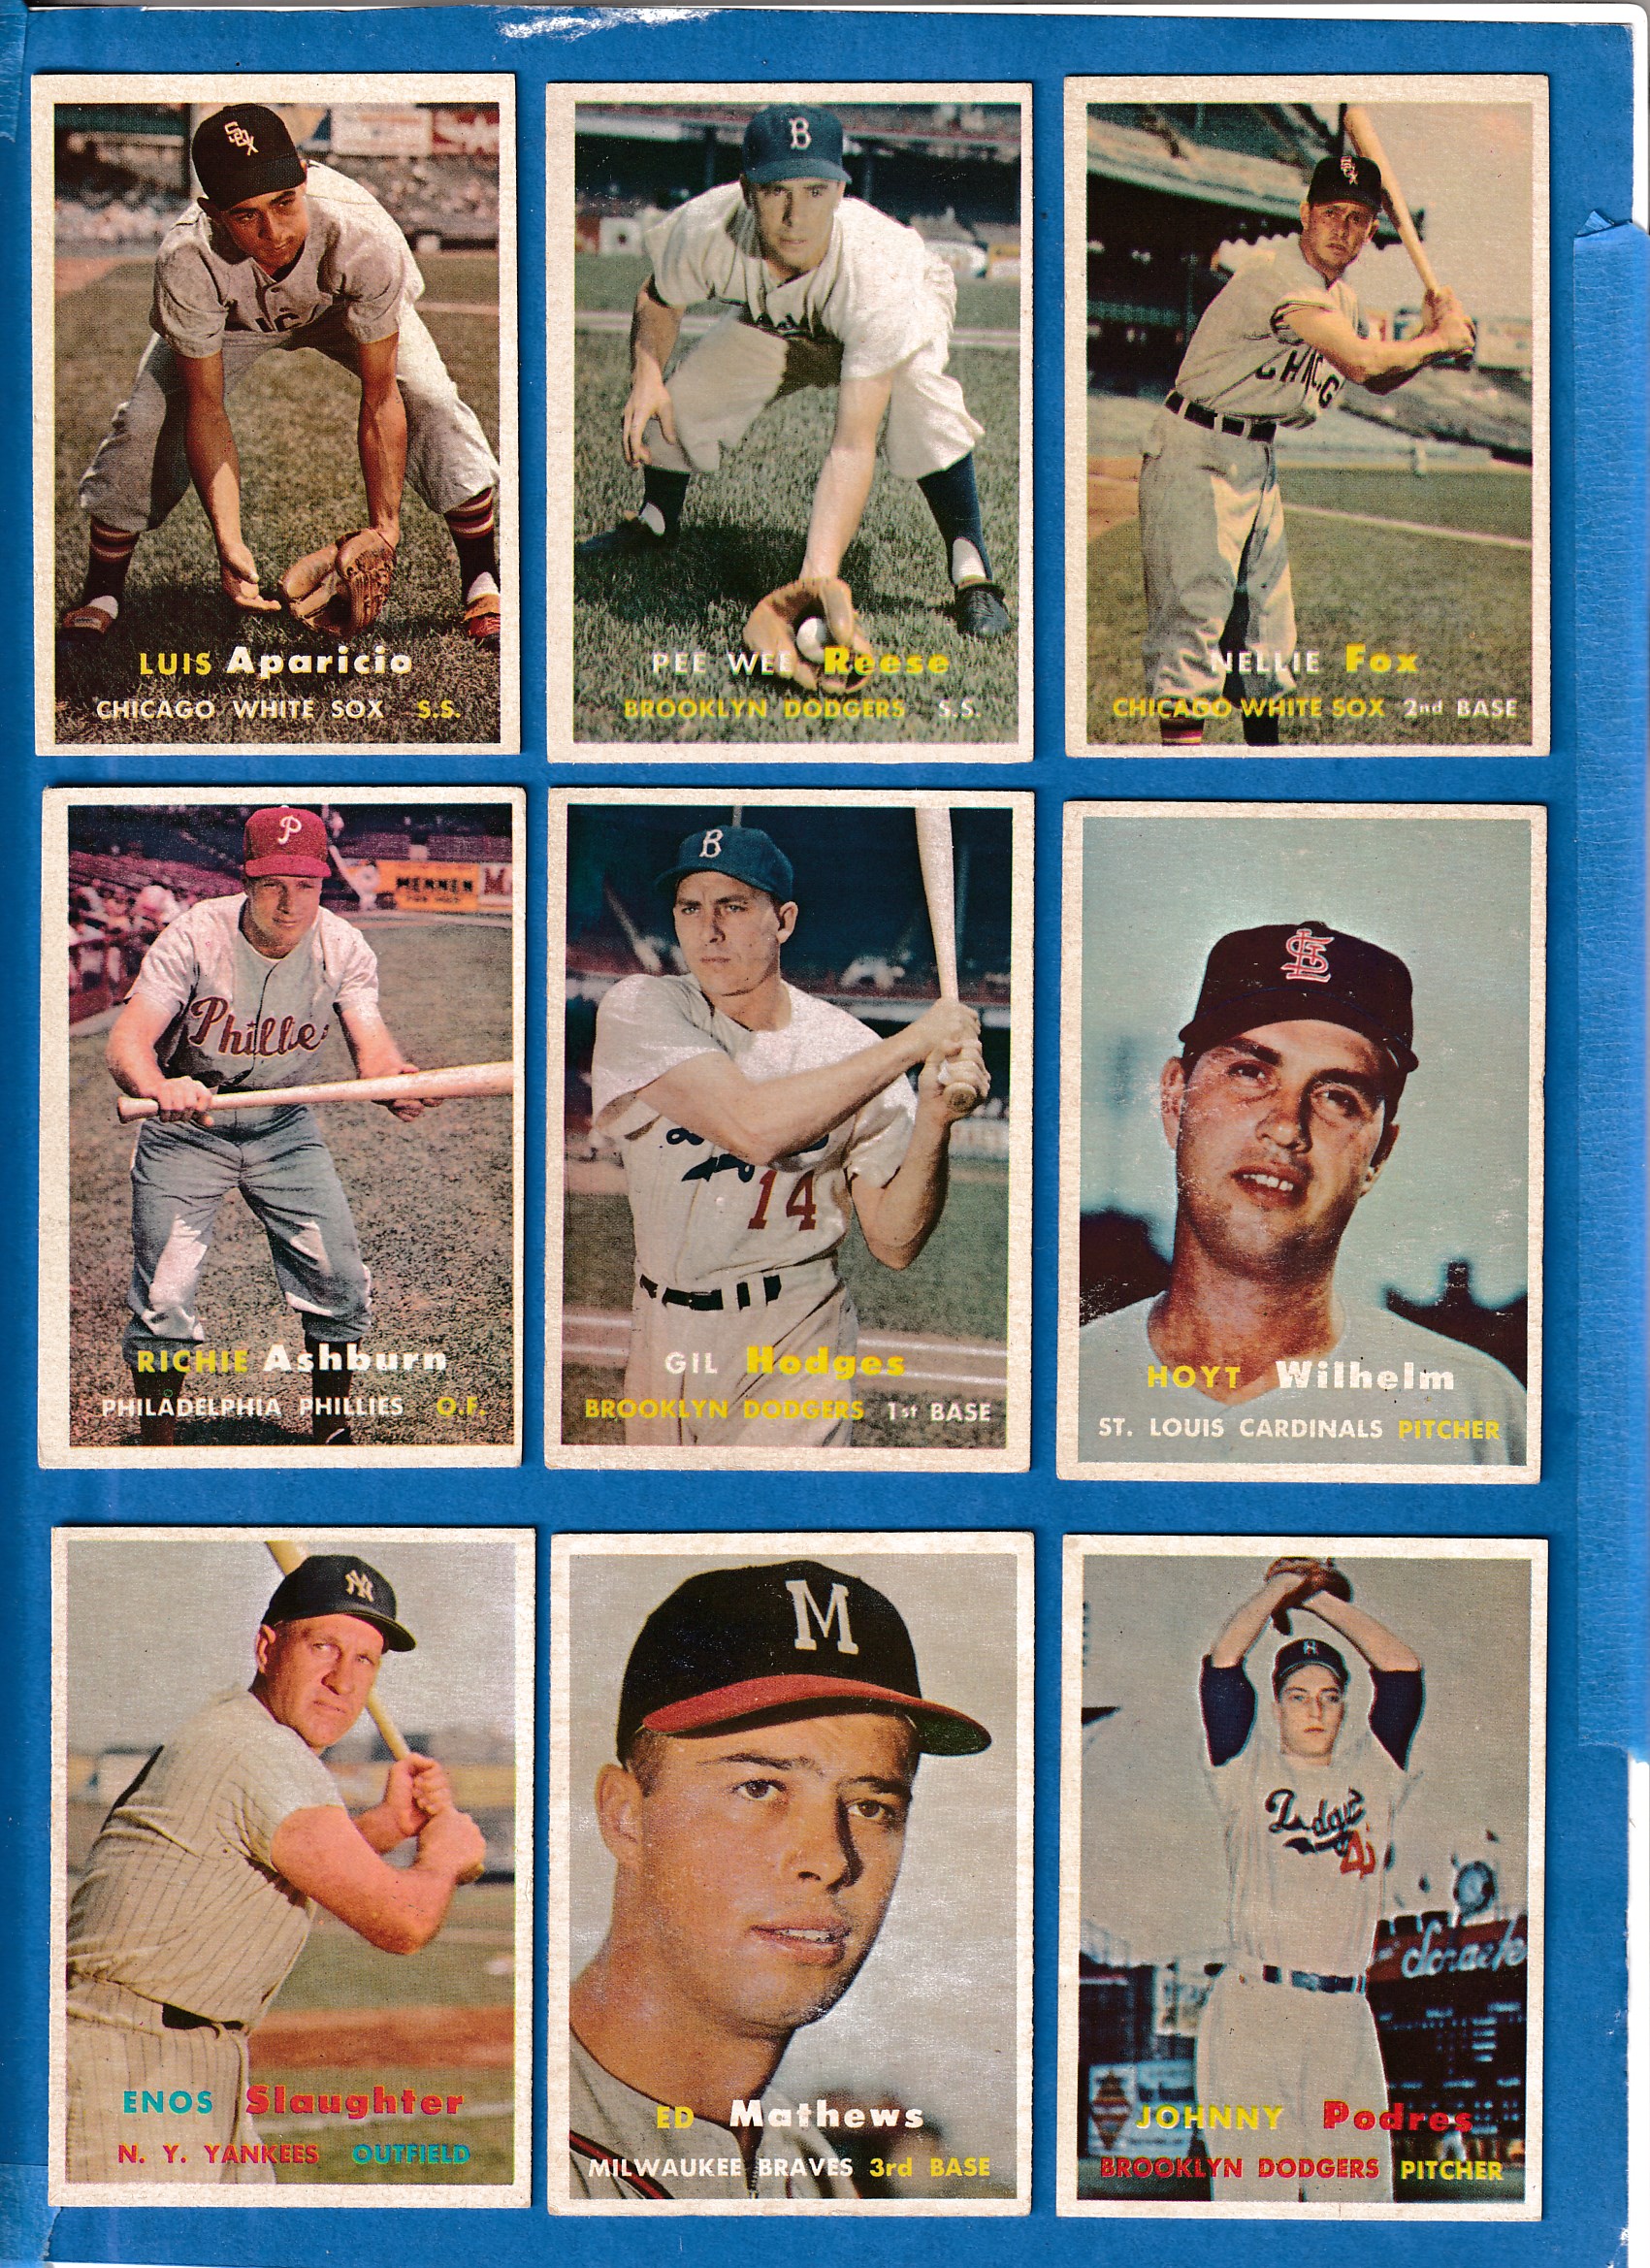 Sold at Auction: Luis Aparicio with baseball card Originally signed picture  of baseball player